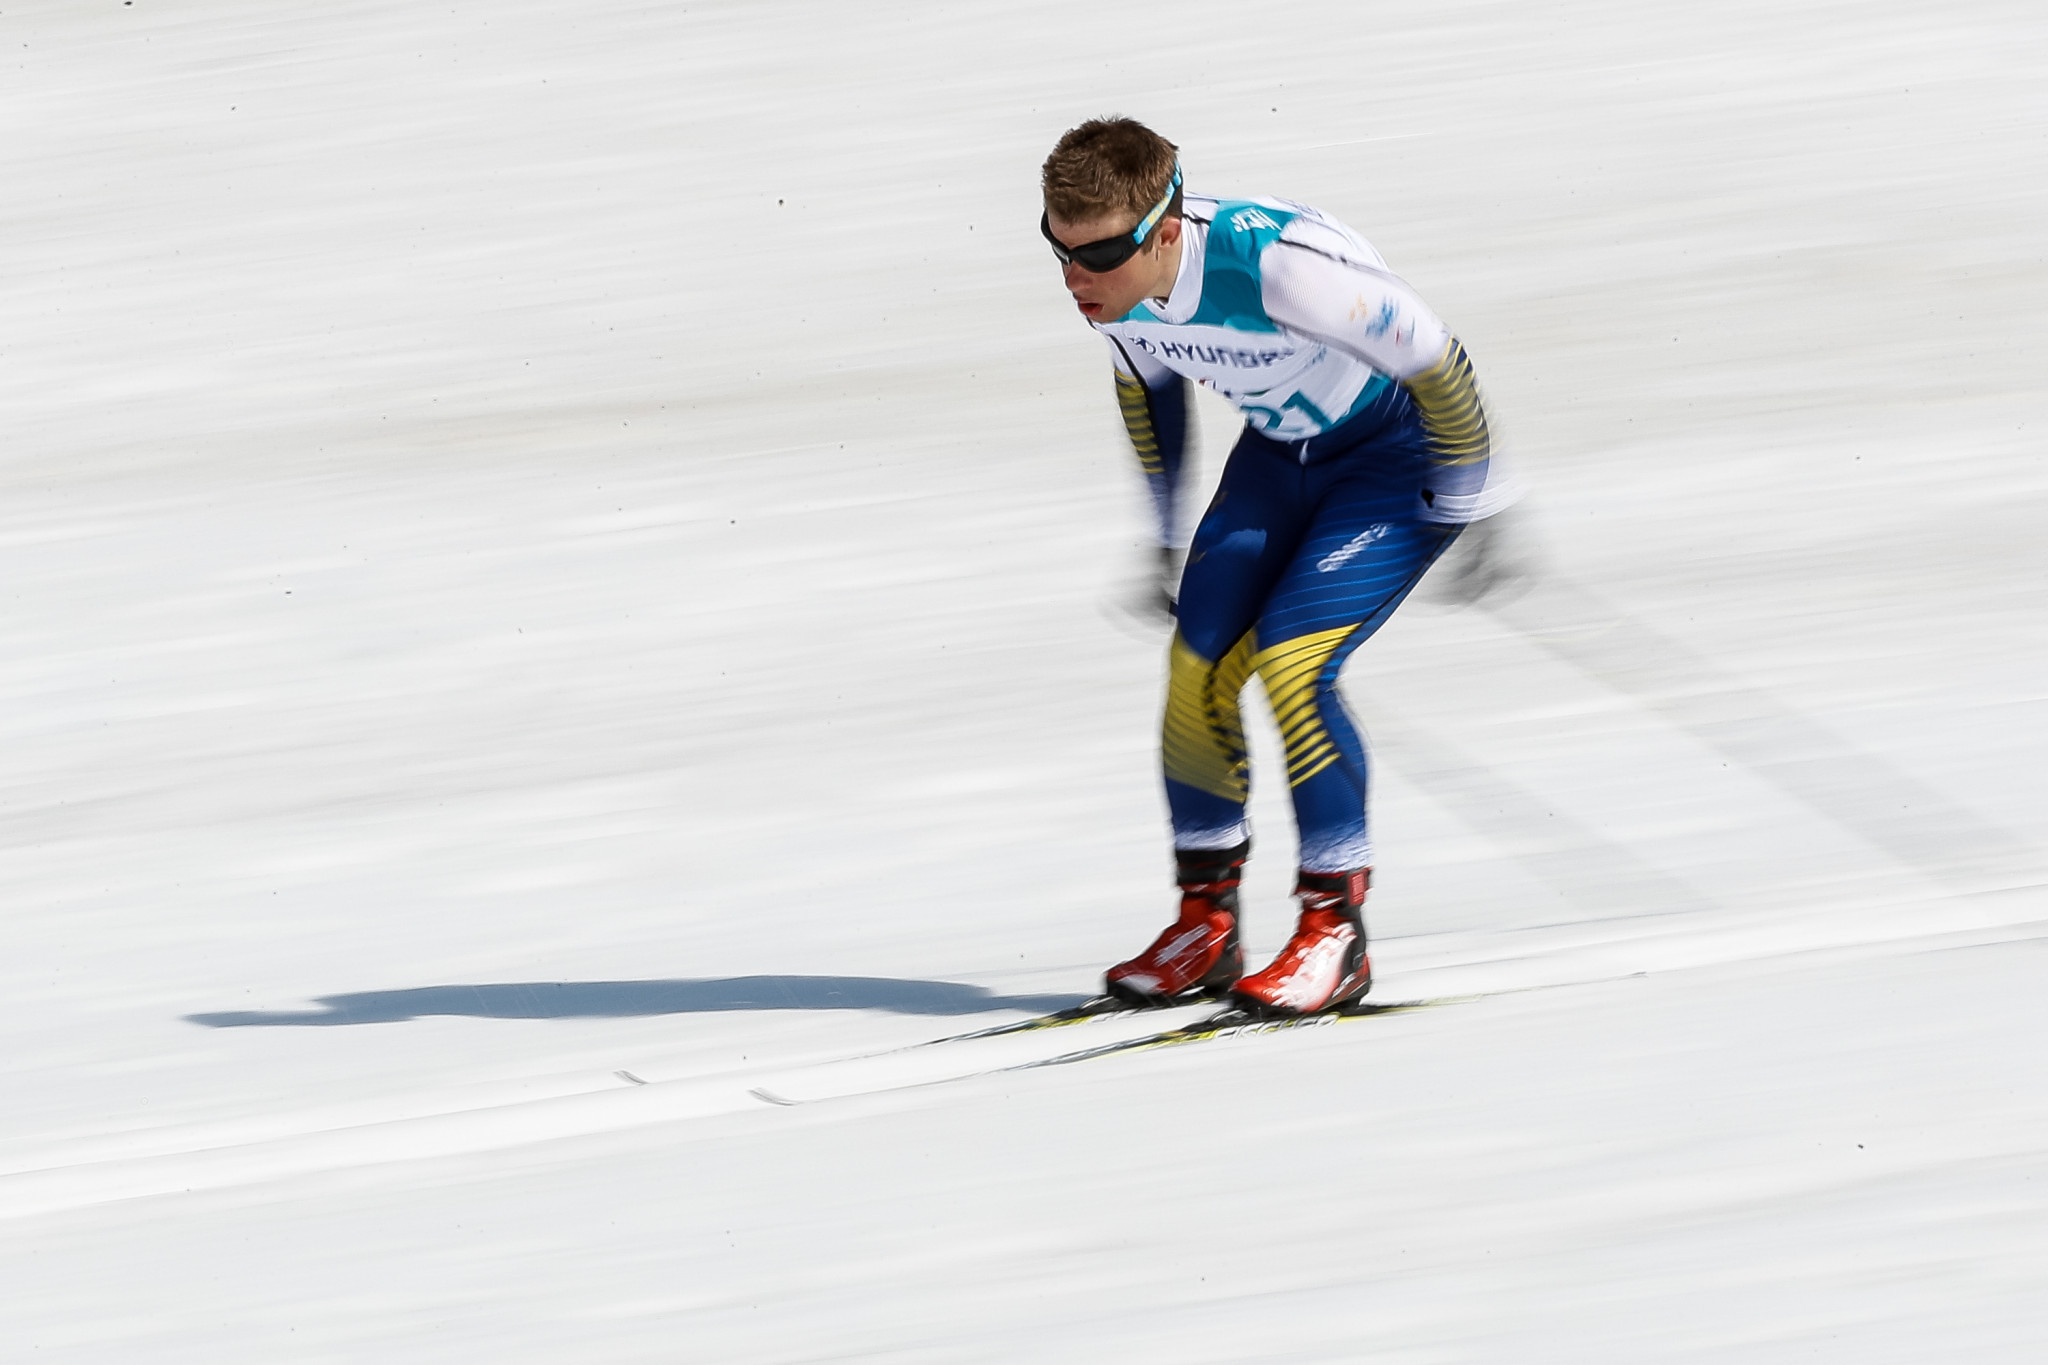 Modin completes hat-trick of gold medals at home World Para Nordic Skiing World Cup